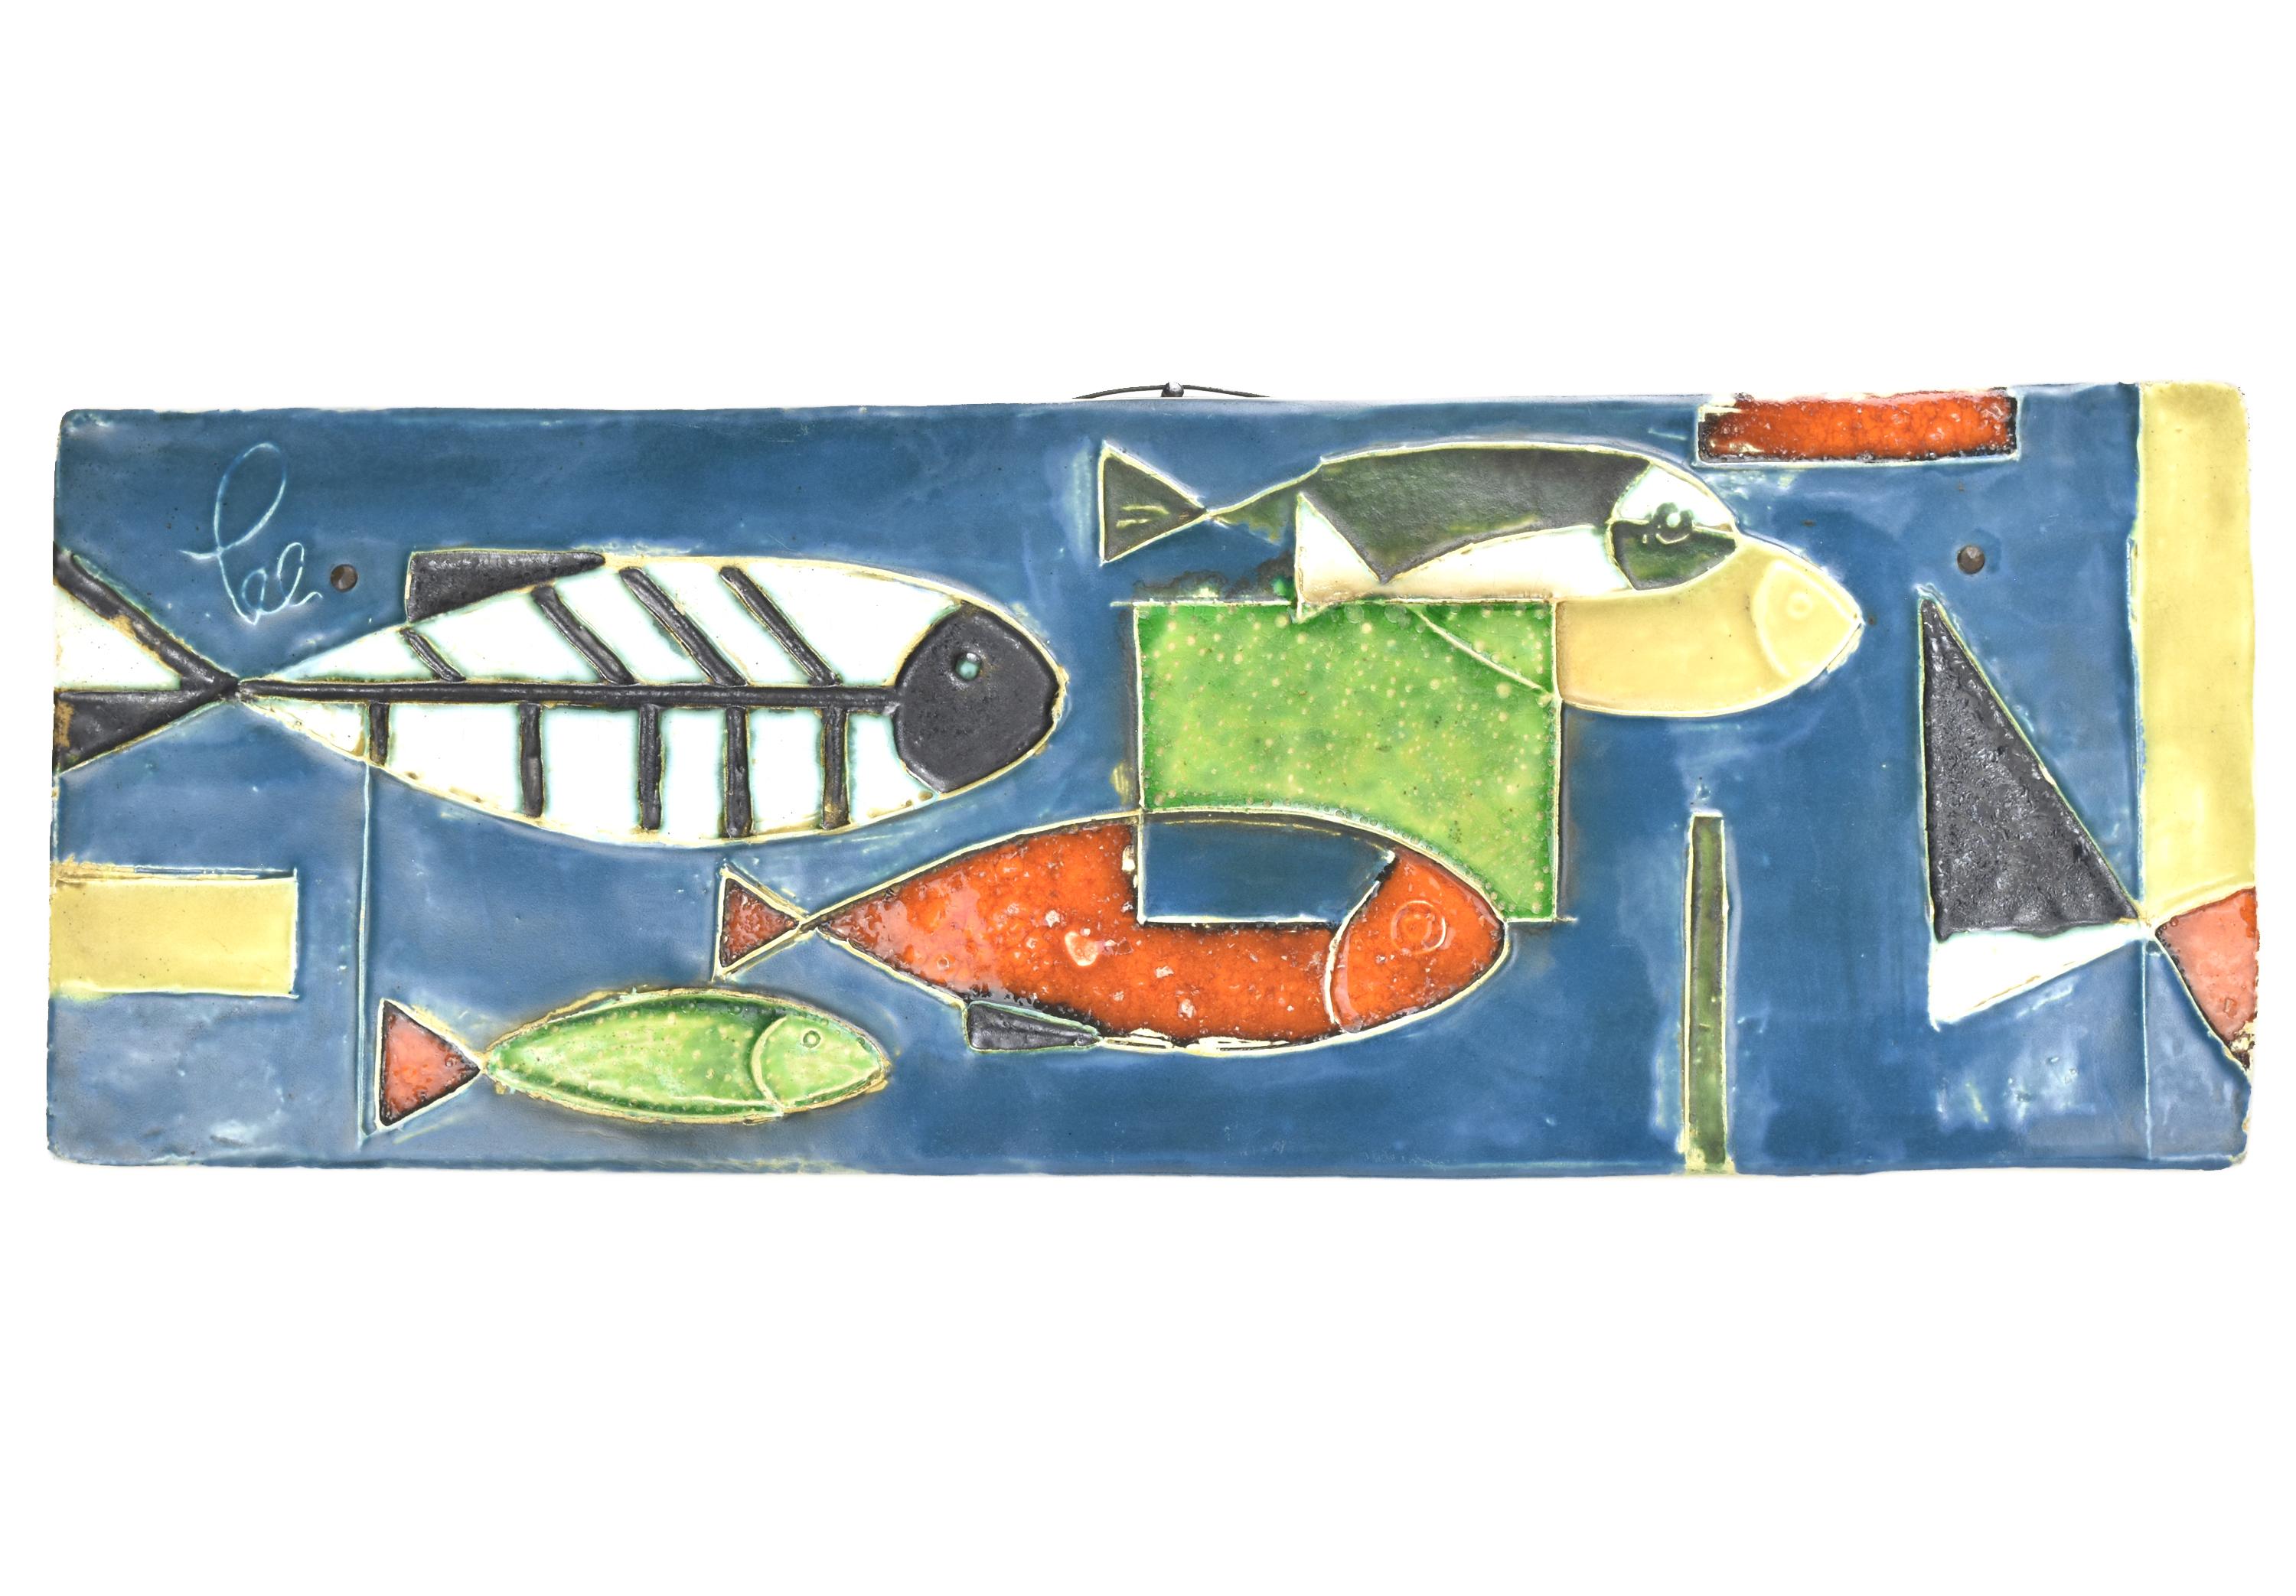 A polychrome glazed pottery wall plaque decorated with several fish, created by Helmut Schaffenacker of Ulm in the 1950s. Helmut Schaffenacker was a renowned German ceramist known for his decorative pottery pieces, and this wall plaque showcases his